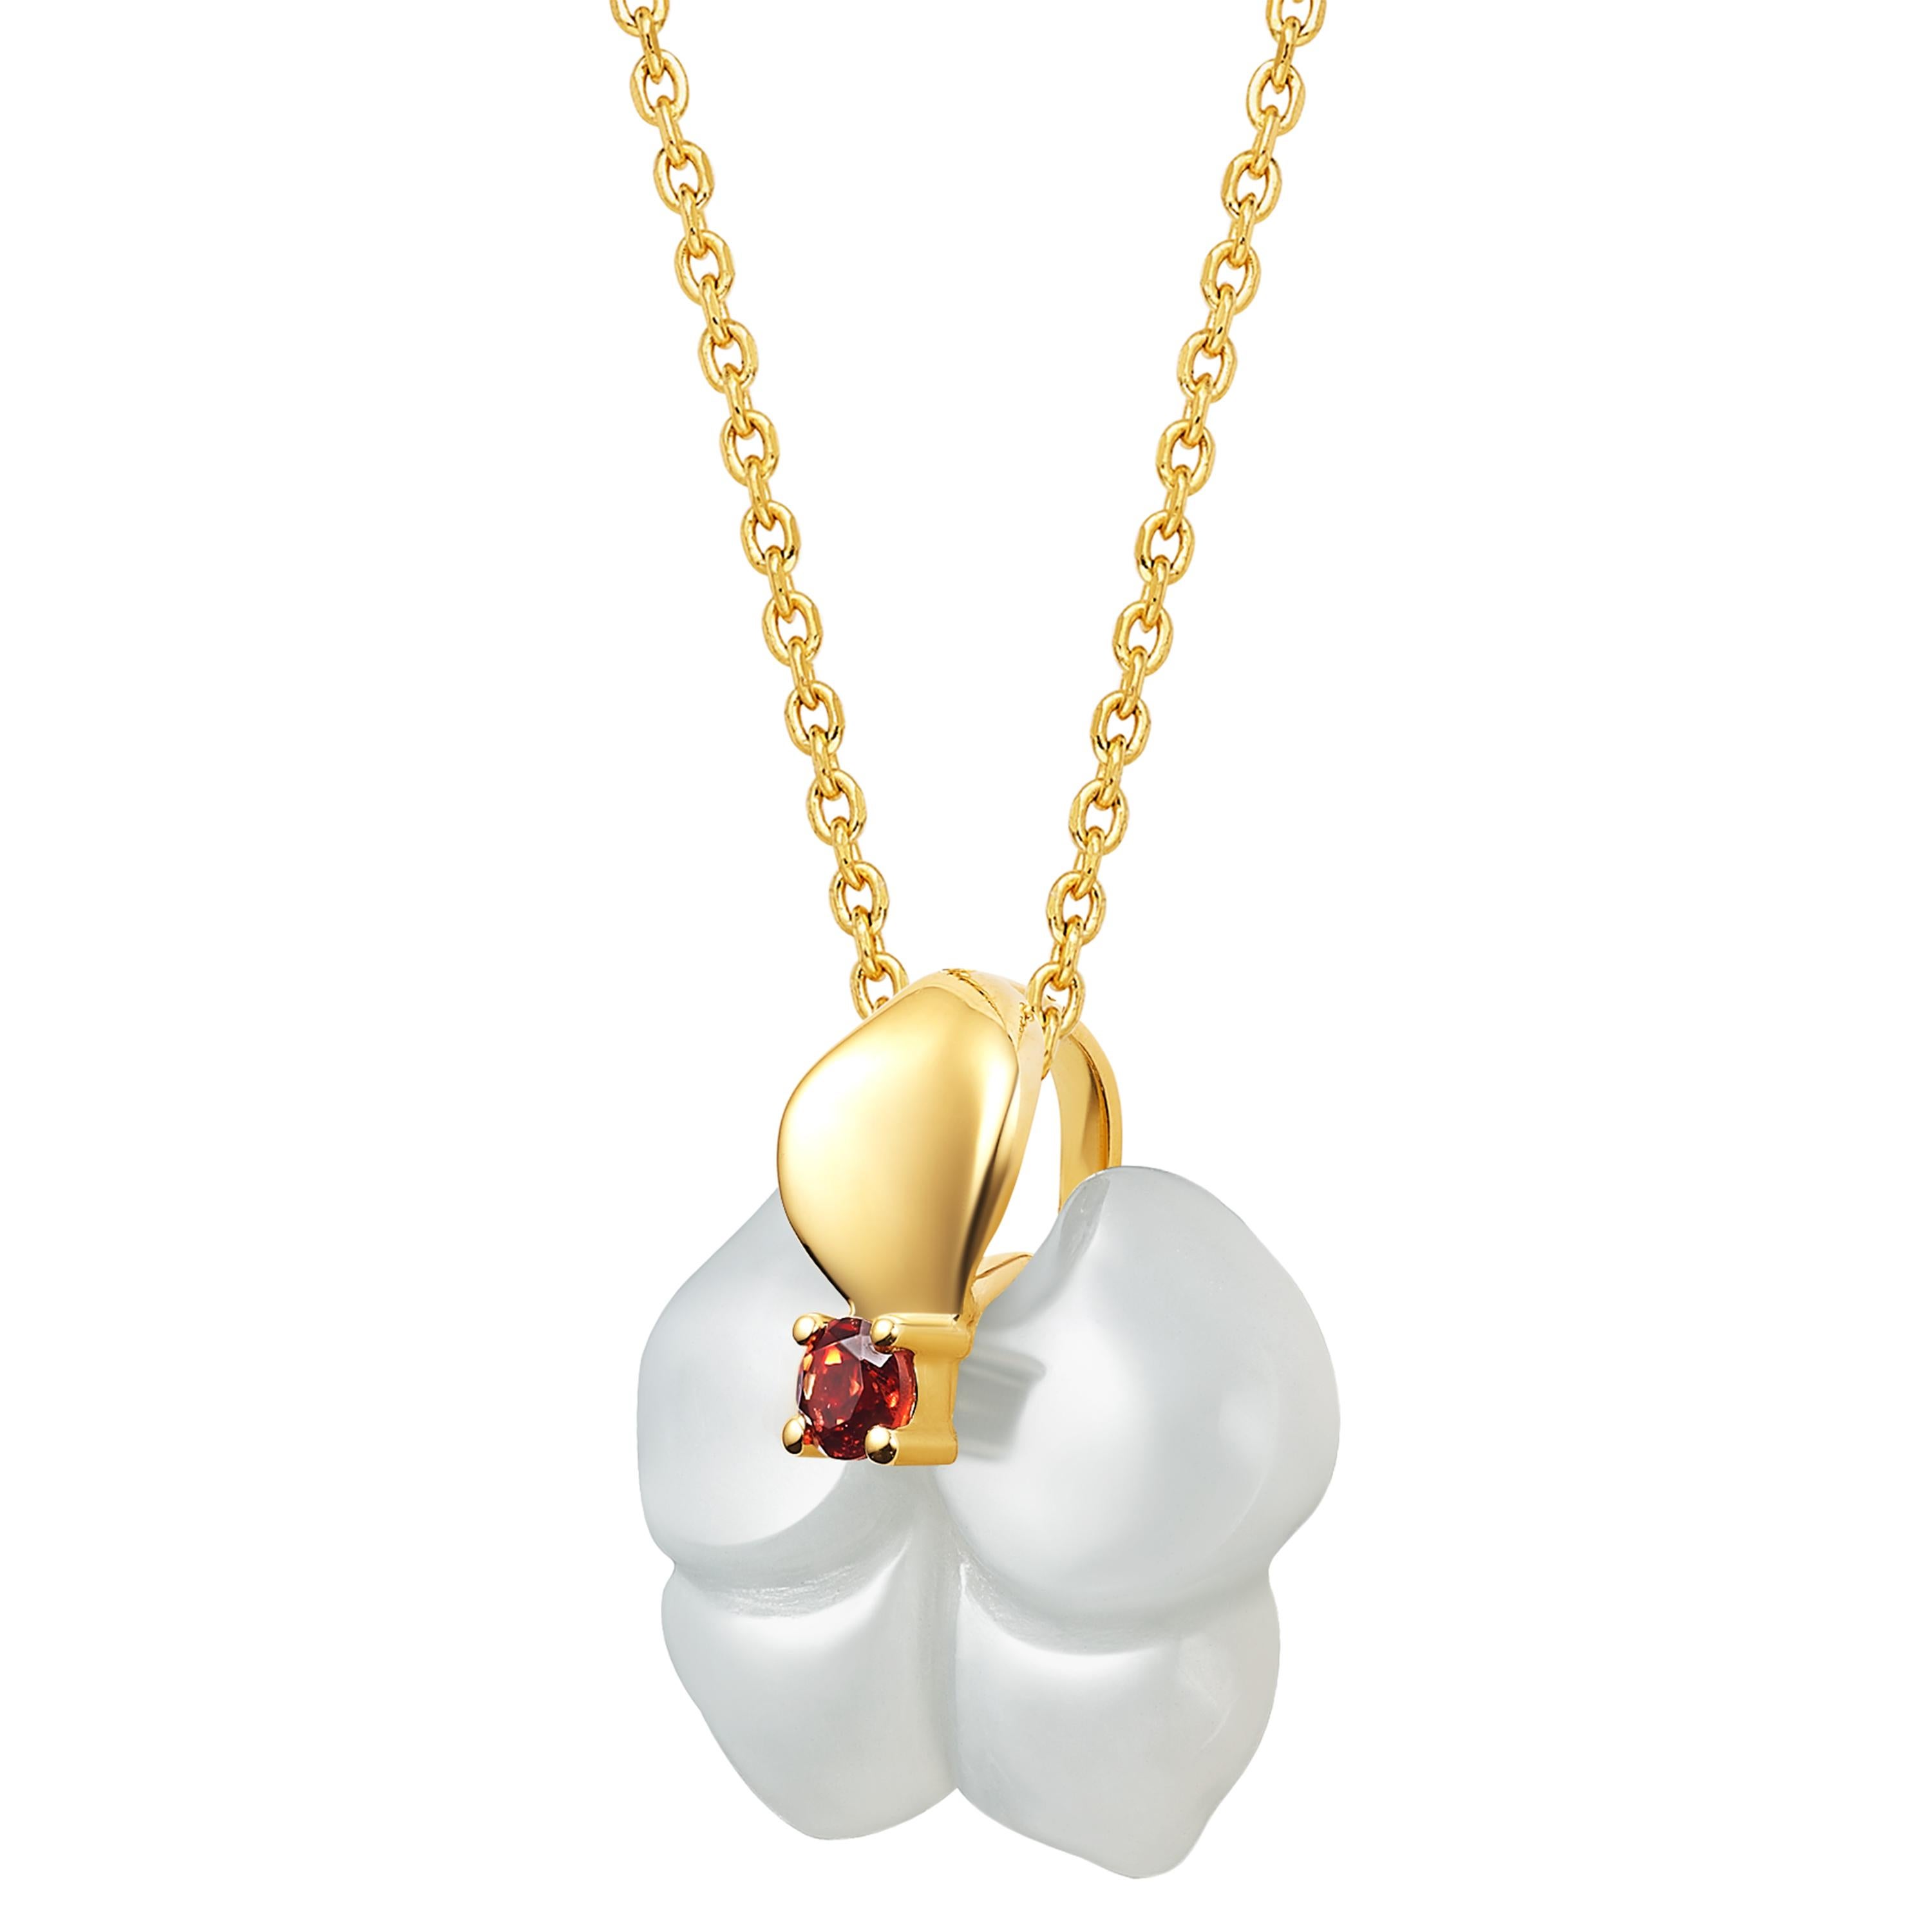 A collection inspired by exotic orchid flowers. White orchids serve as a symbol of elegance and love. The Fei Liu Orchid jewellery captures the beauty of the orchid in intricate hand-cut Russian nephrite. Fall in love with the everlasting bejewelled